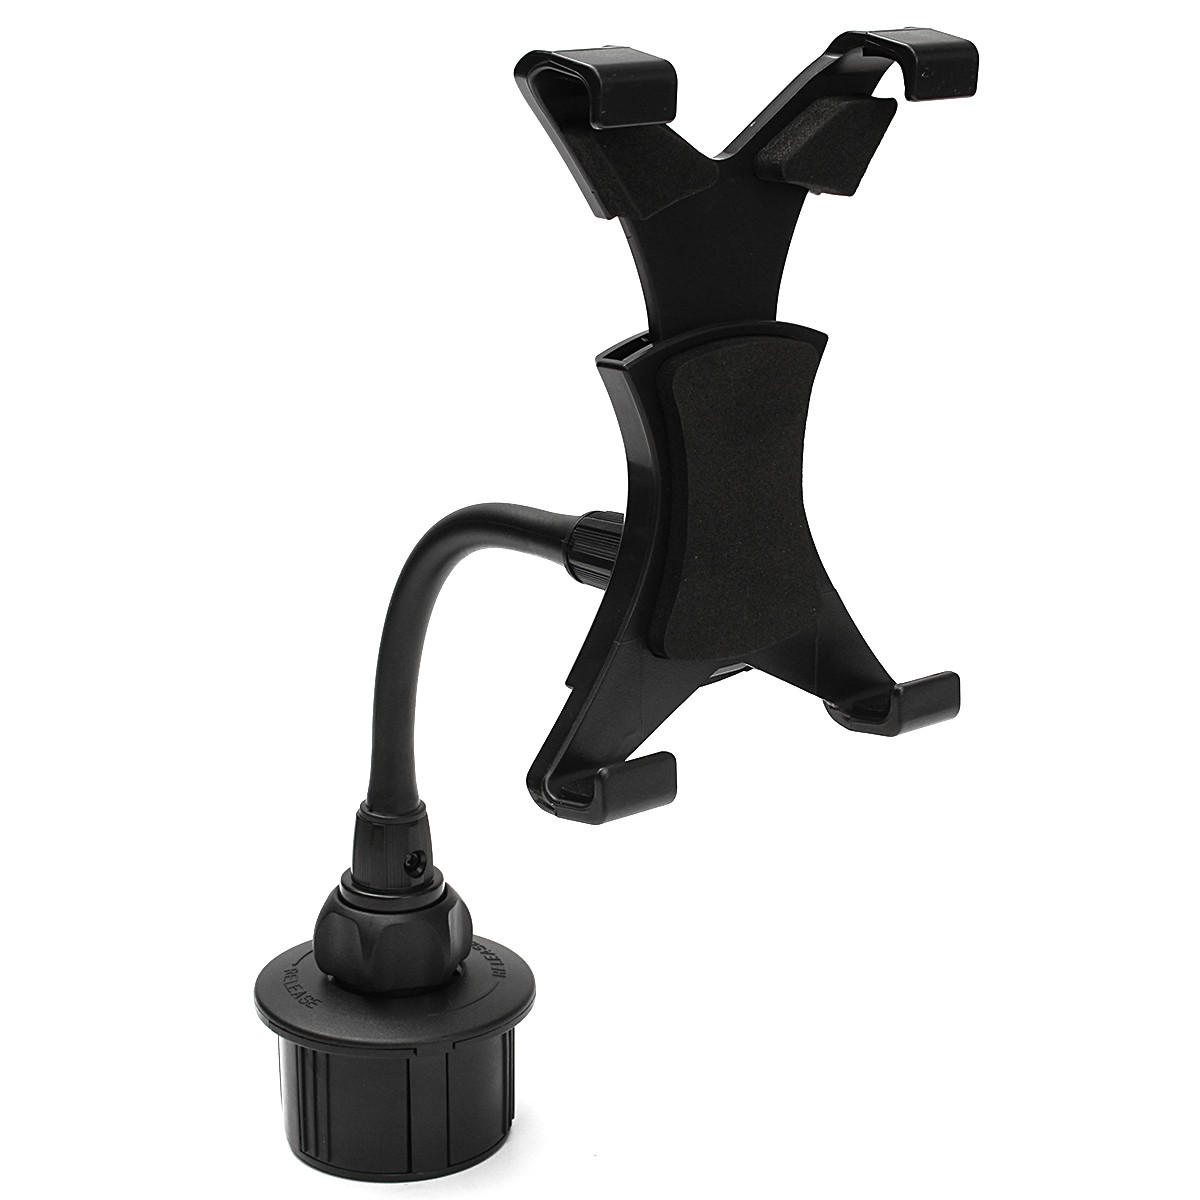 Find Adjustable Bendy Car Cup Holder Mount for 7 Inch to 10 Inch Tablet for Sale on Gipsybee.com with cryptocurrencies